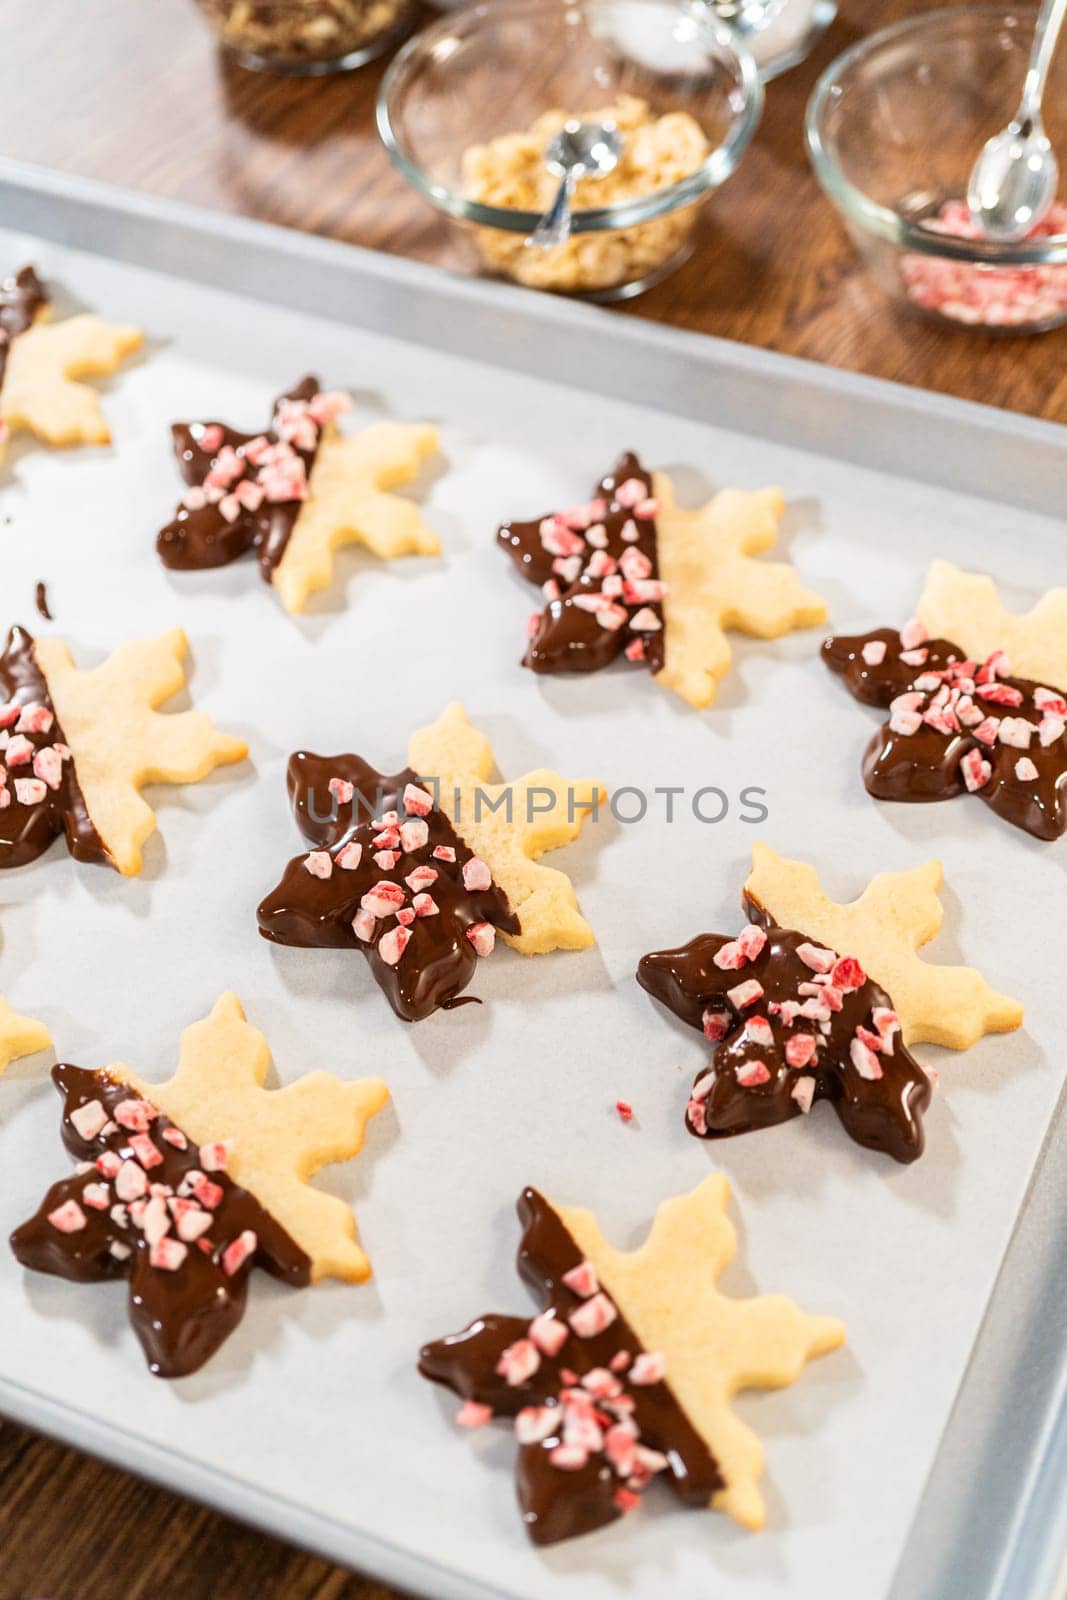 Preparing star-shaped cookies, half-dipped in chocolate, accented with peppermint chocolate chips for the holidays.